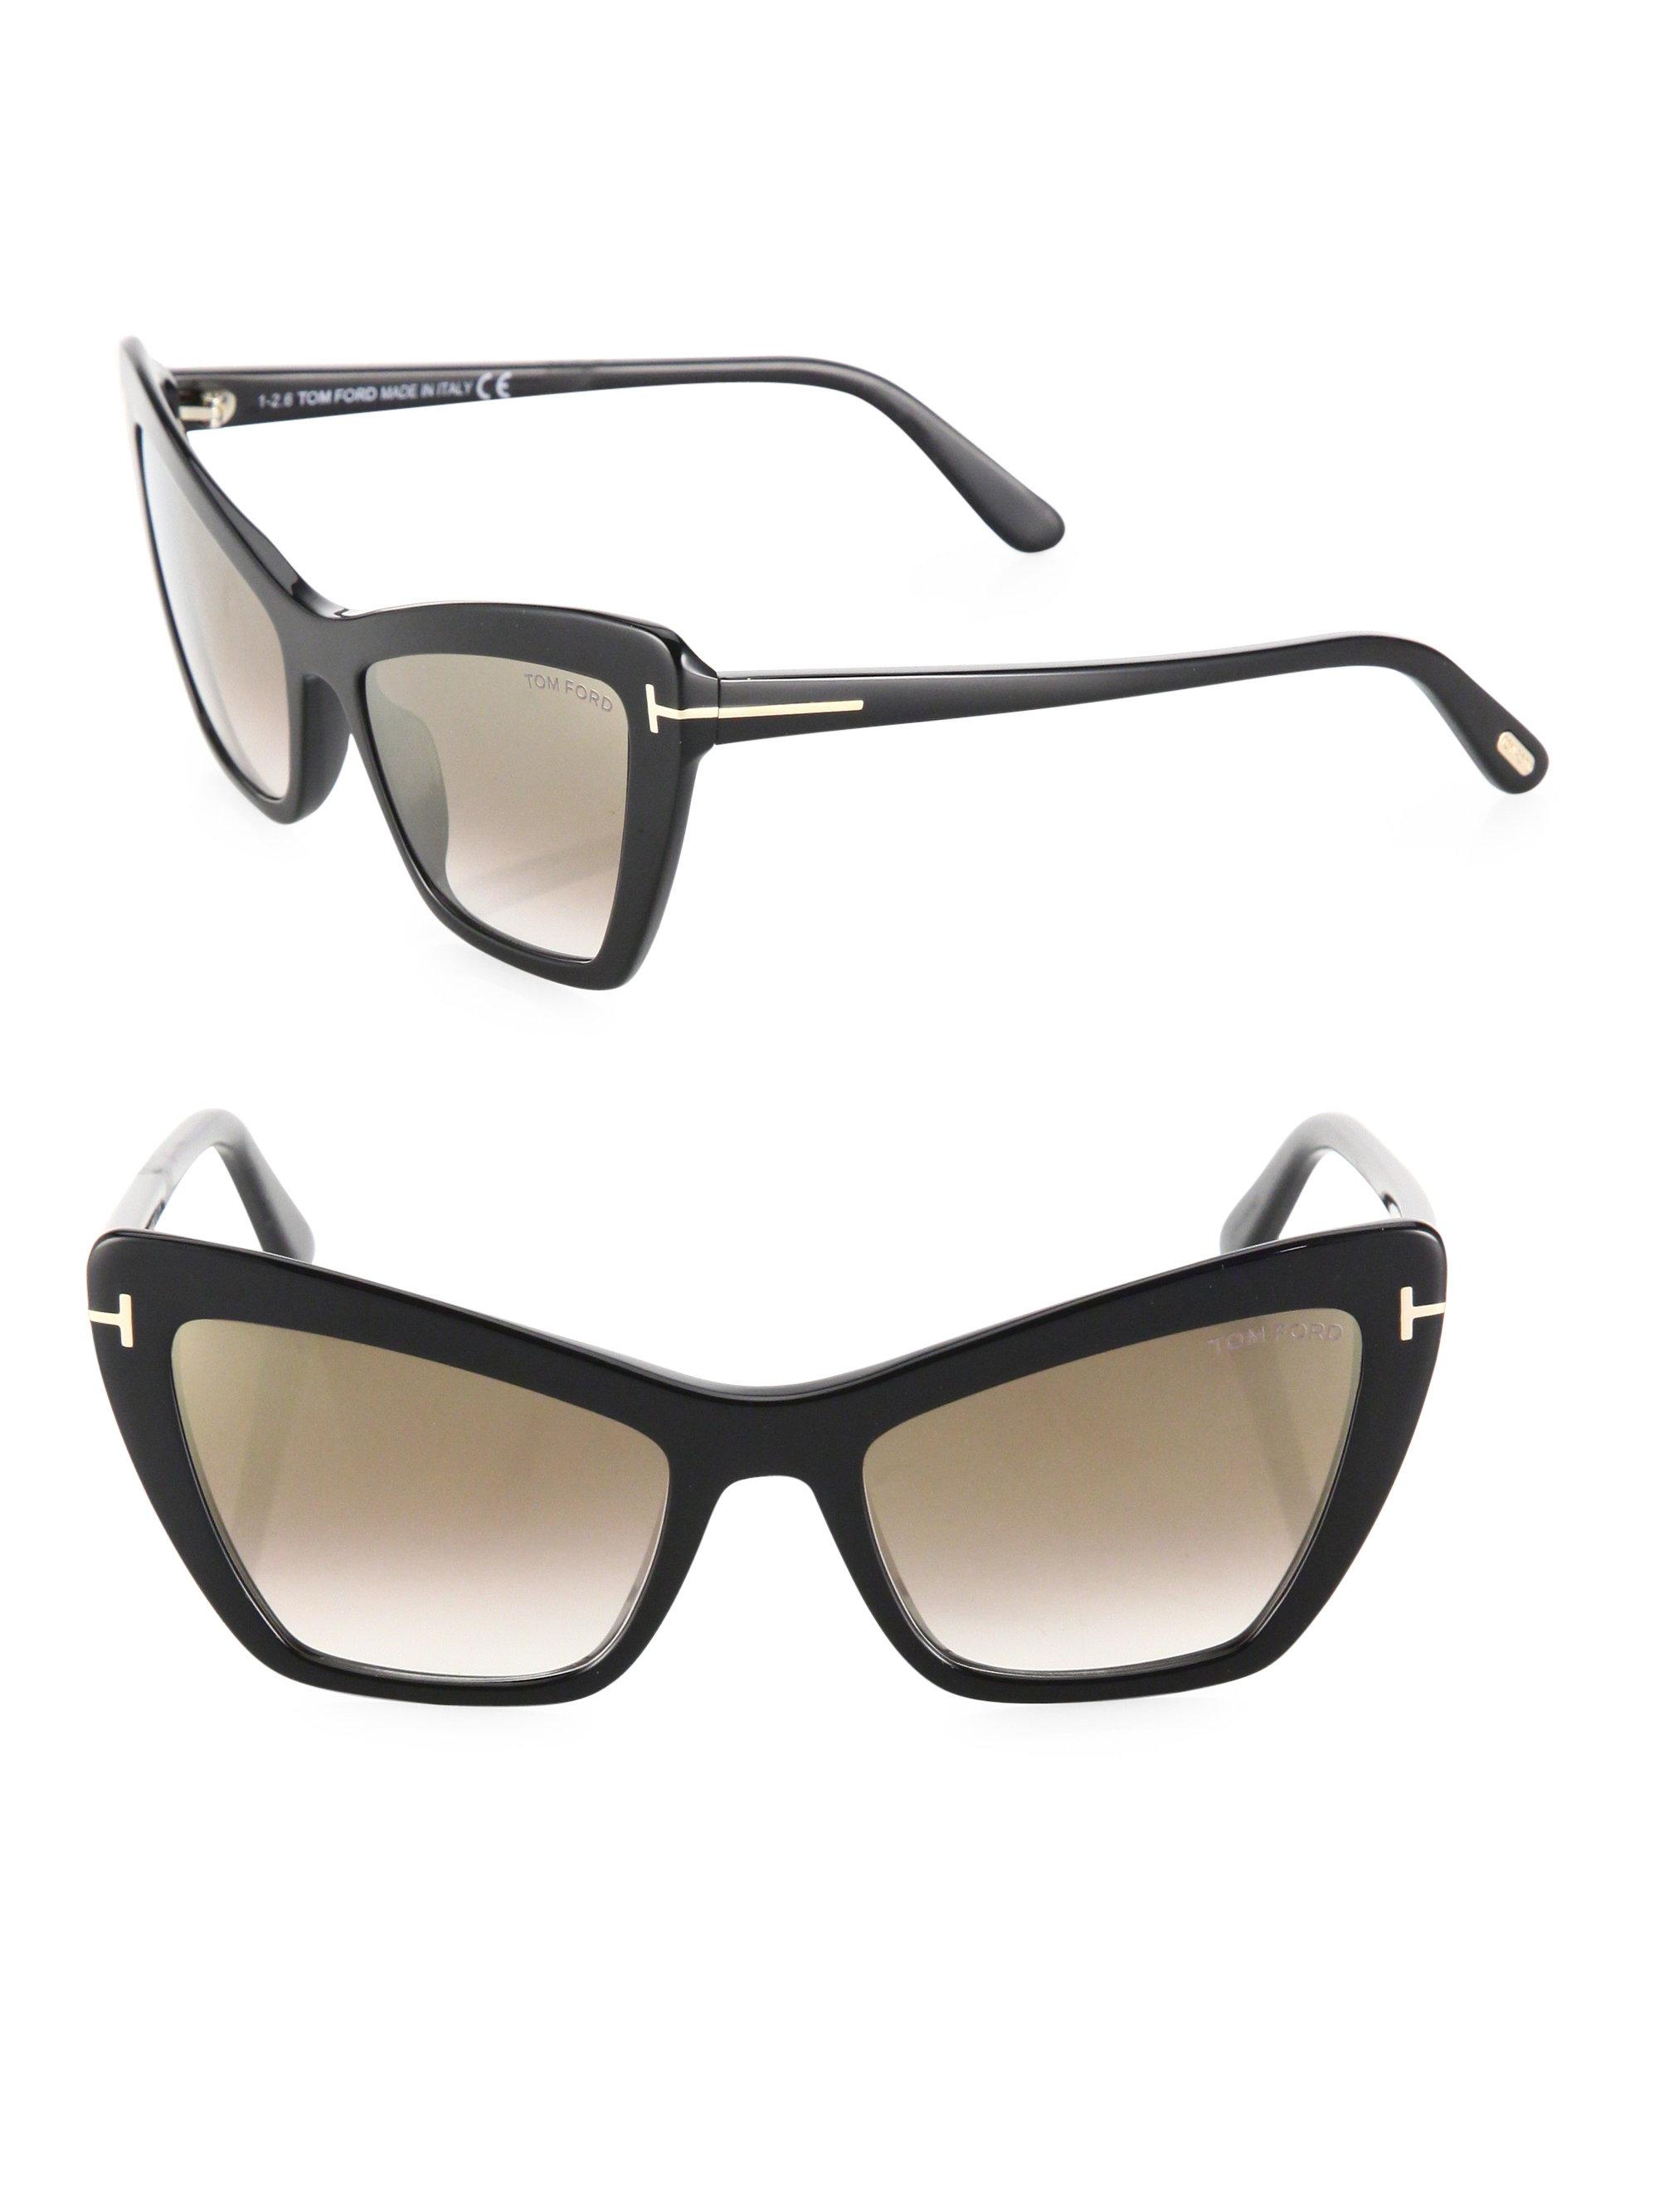 Lyst Tom Ford Valesca 55mm Mirrored Cat Eye Sunglasses In Black 